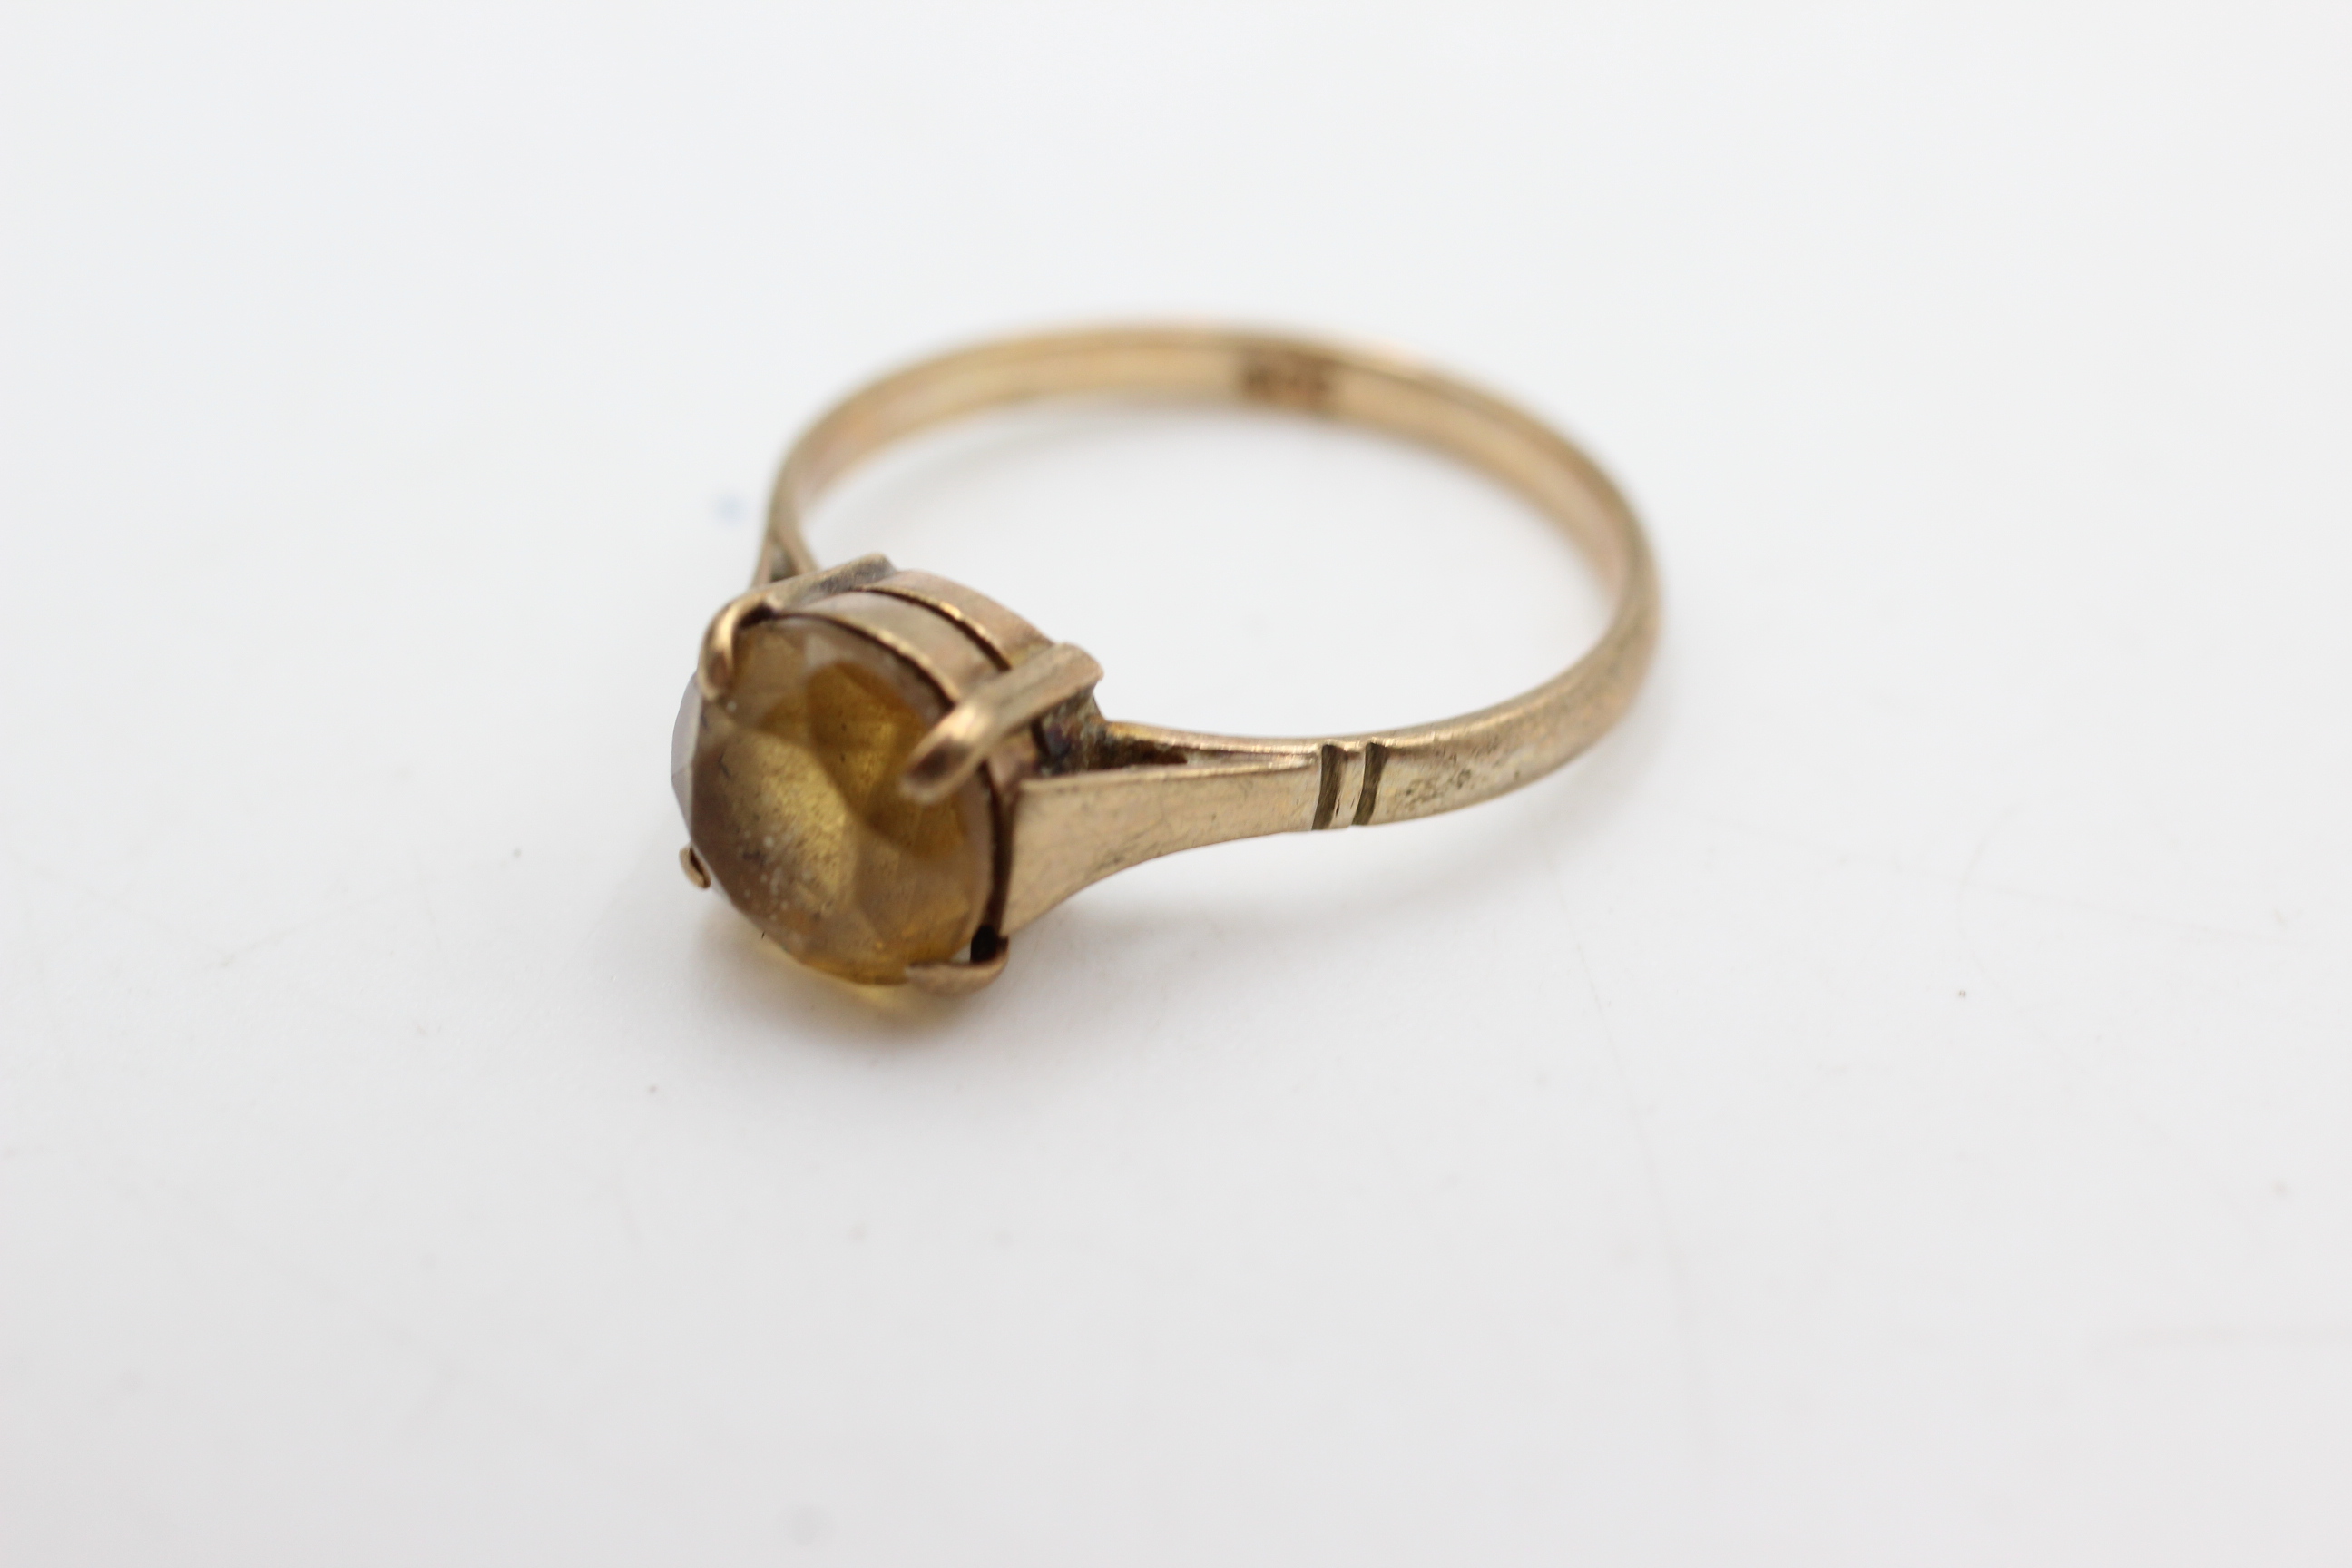 9ct gold citrine solitaire ring (2.2g) - Image 3 of 4